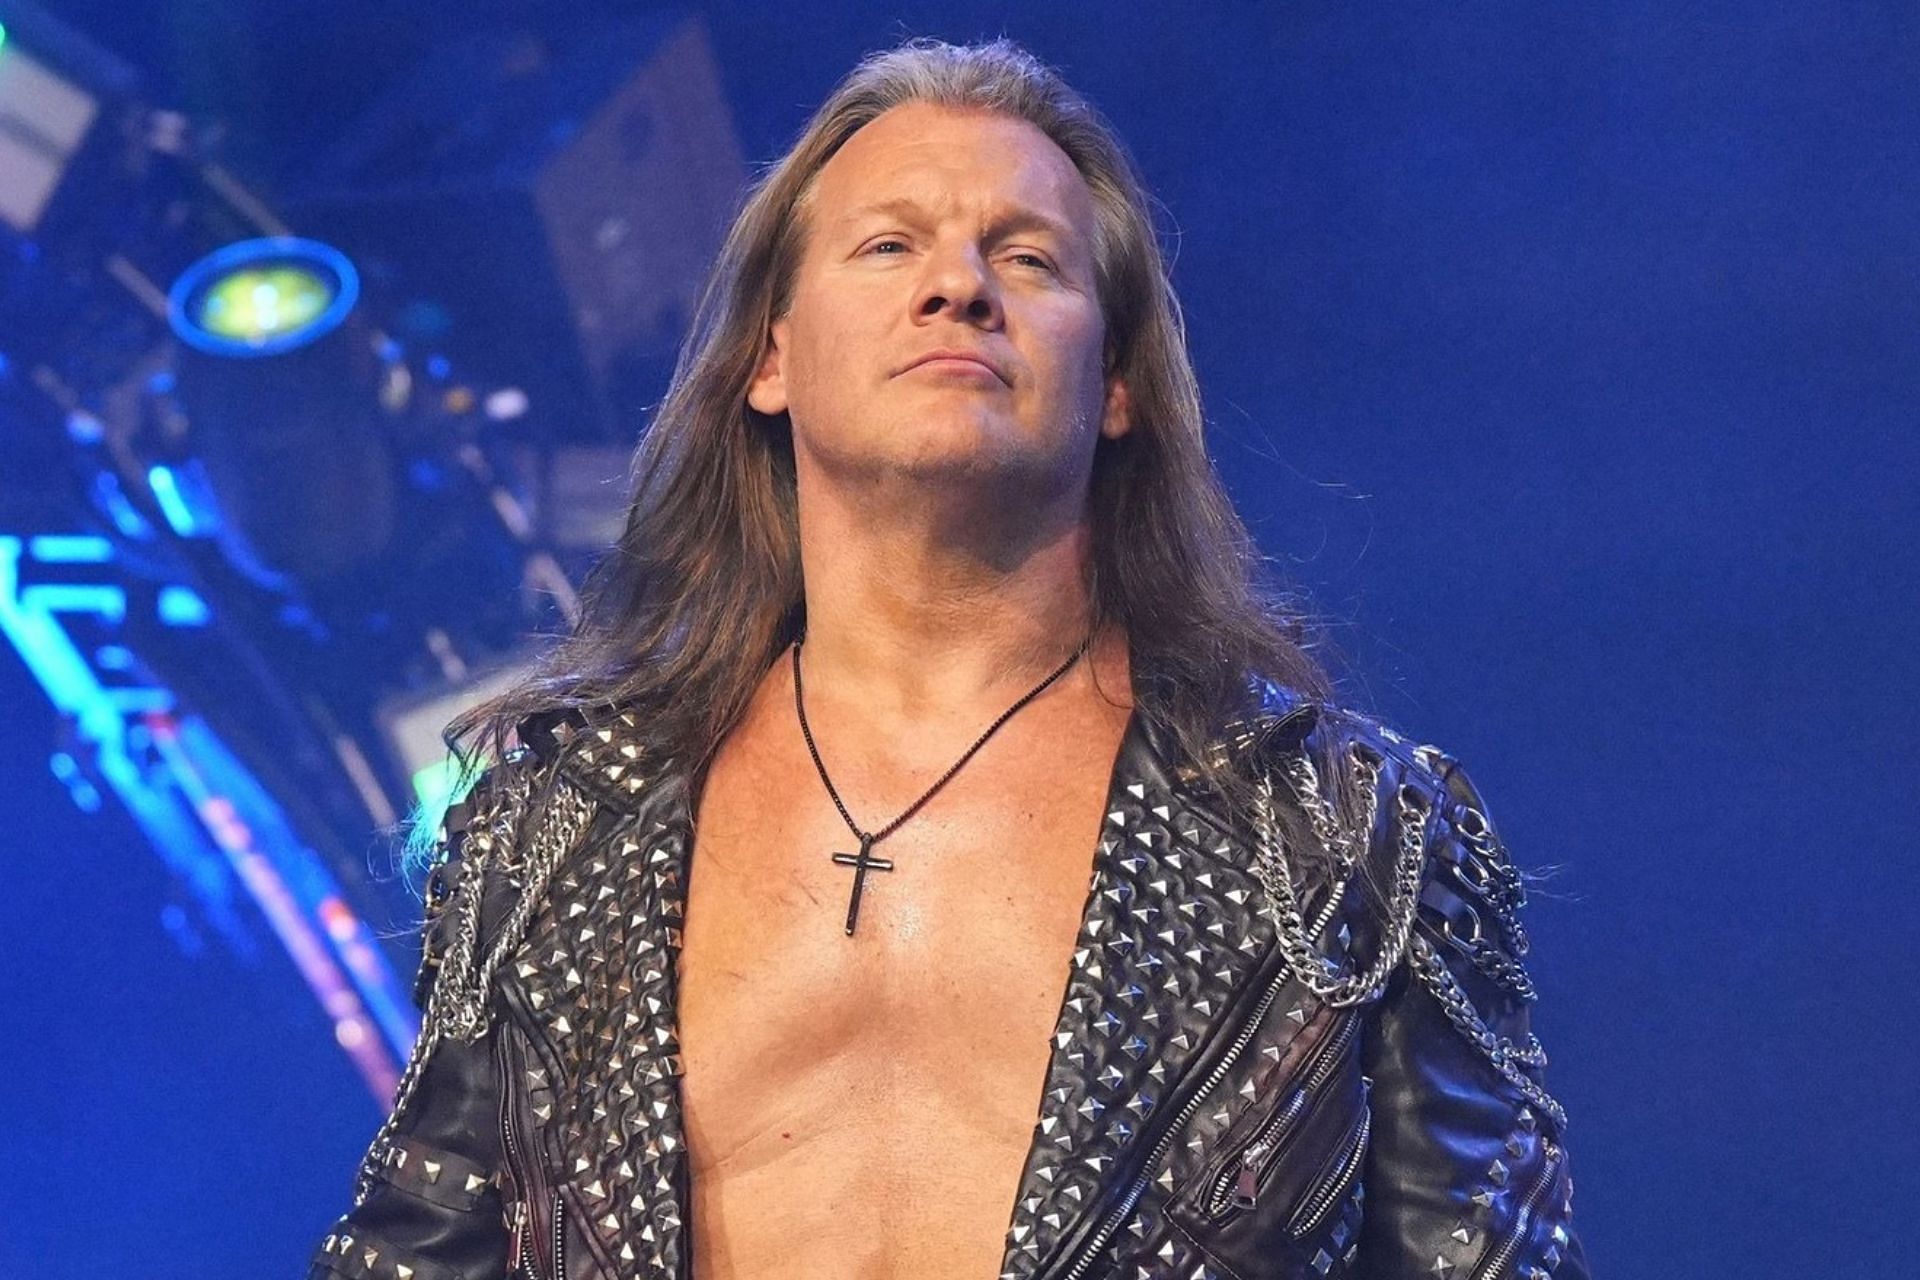 Chris Jericho should have something in his mind after his match with Will Ospreay